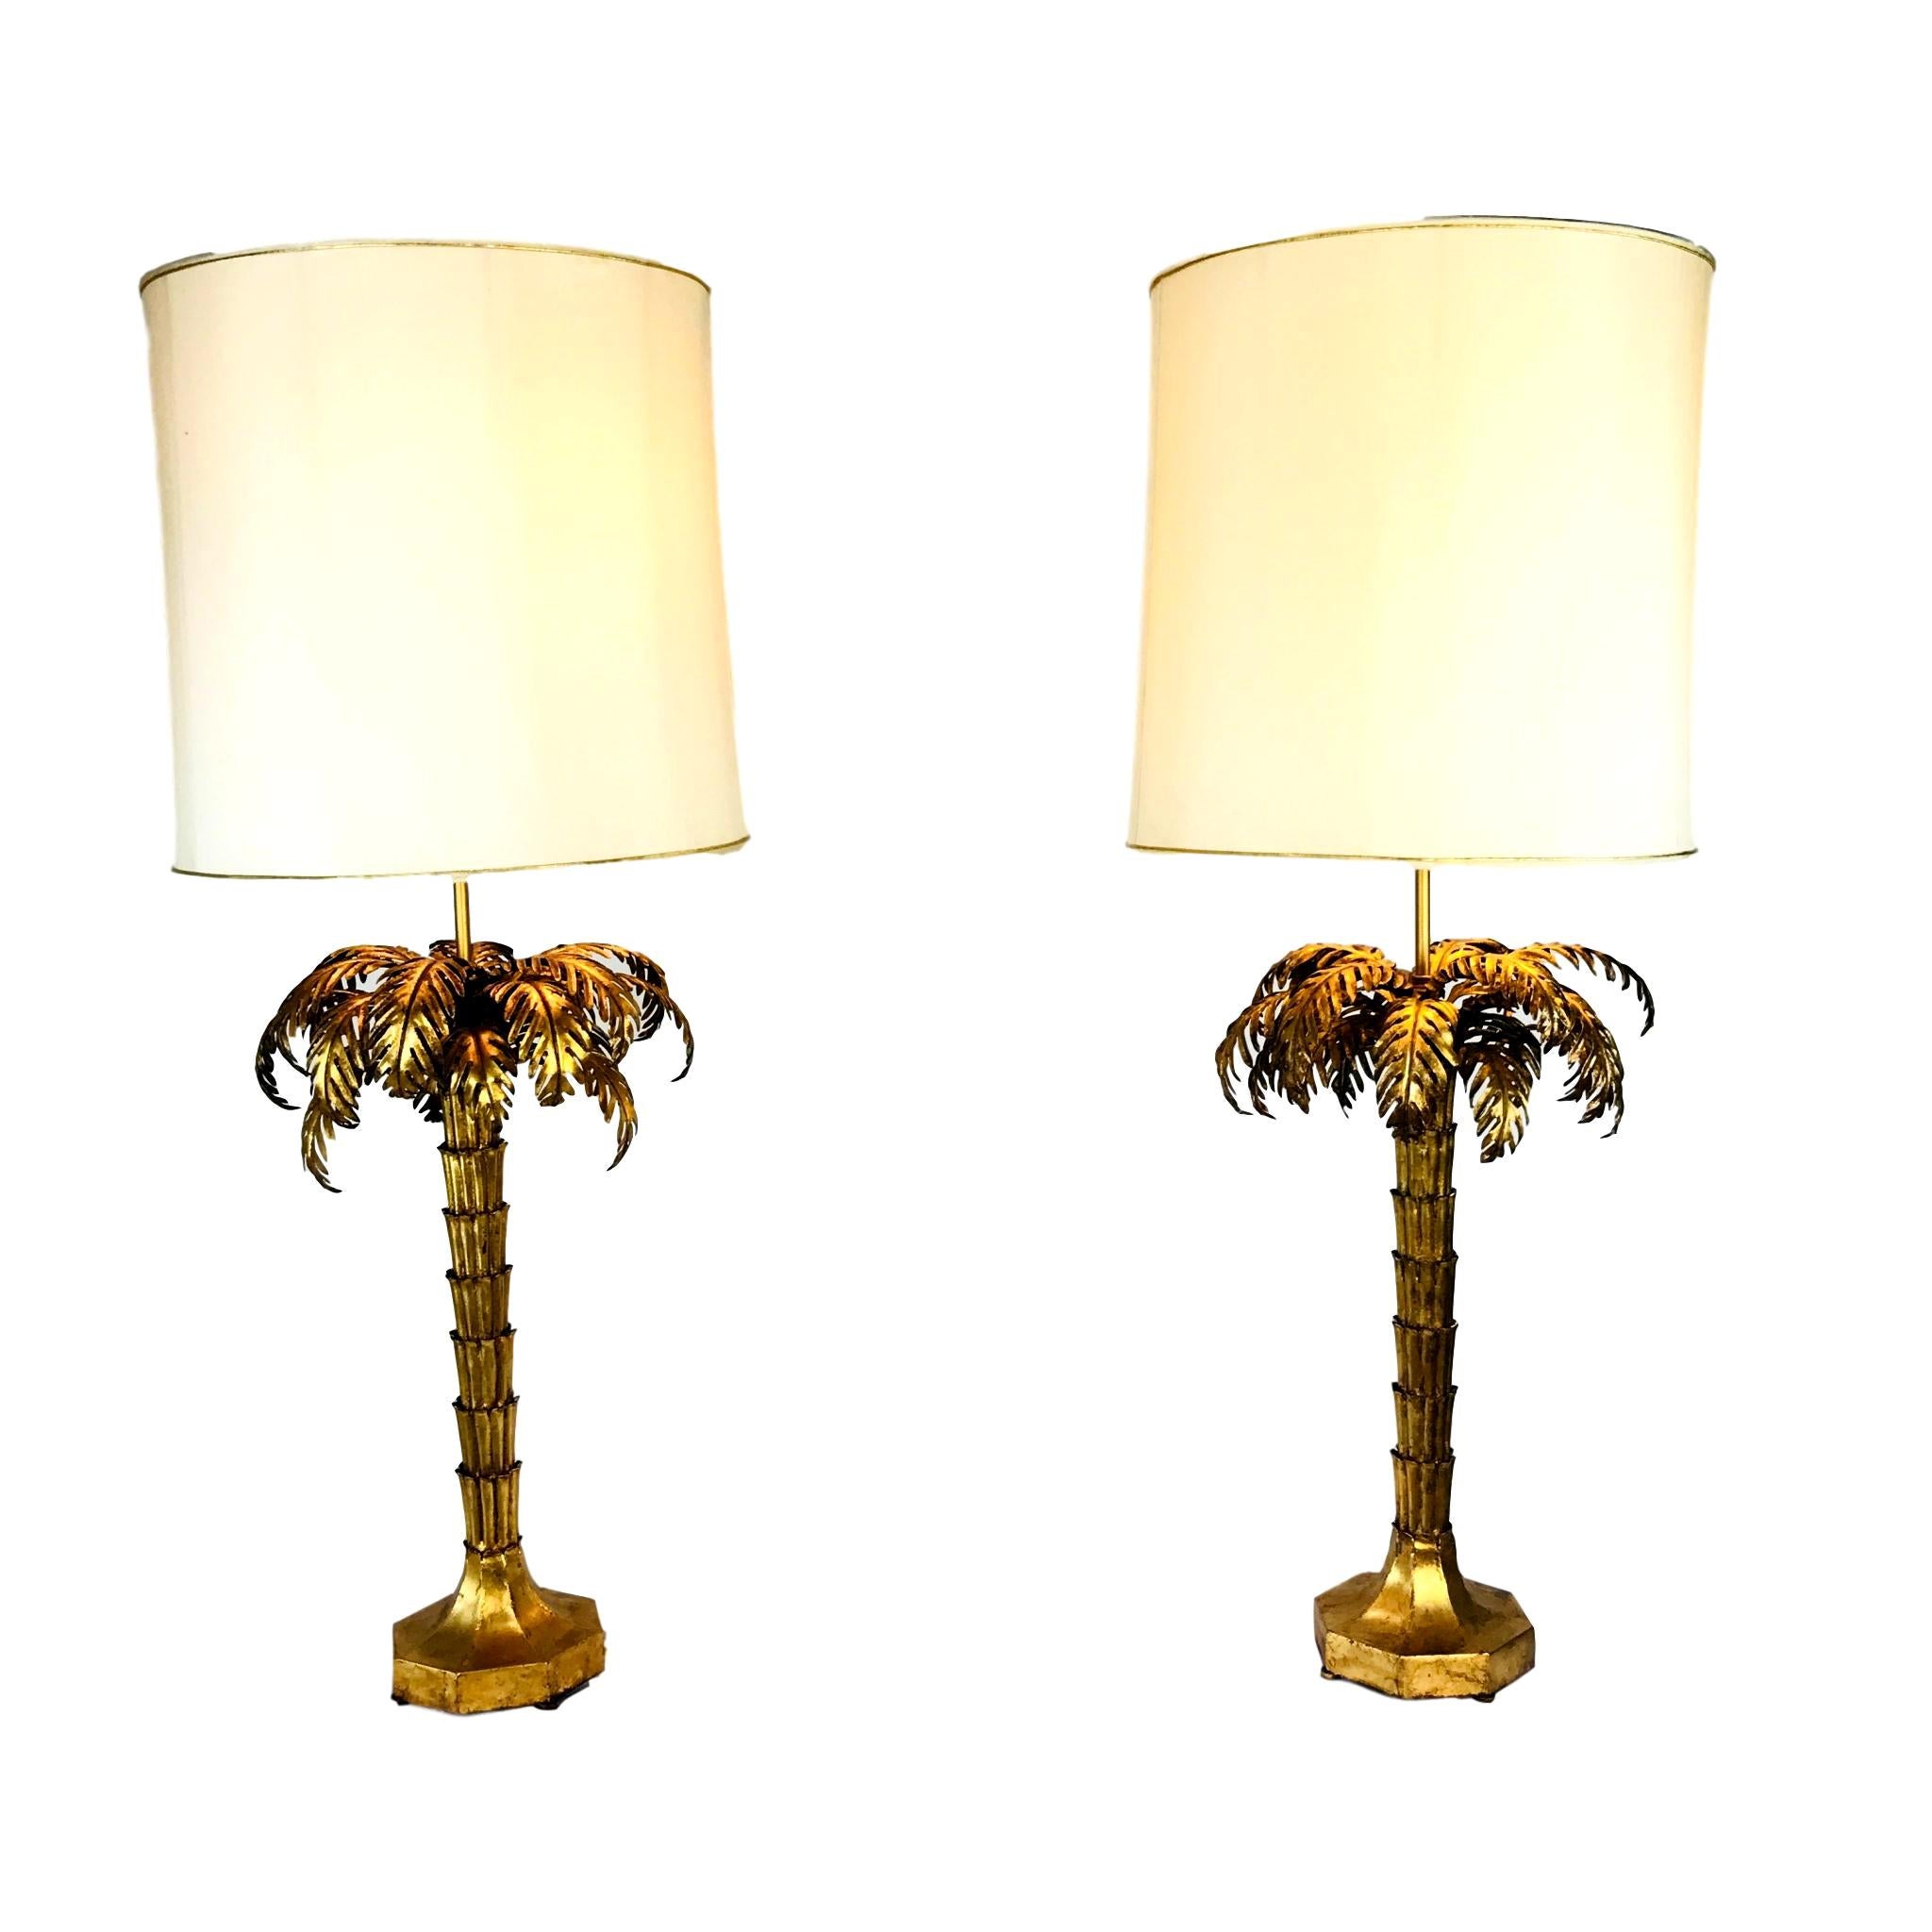 Exceptional Pair of Gold Gilded Palm Tree Lamps